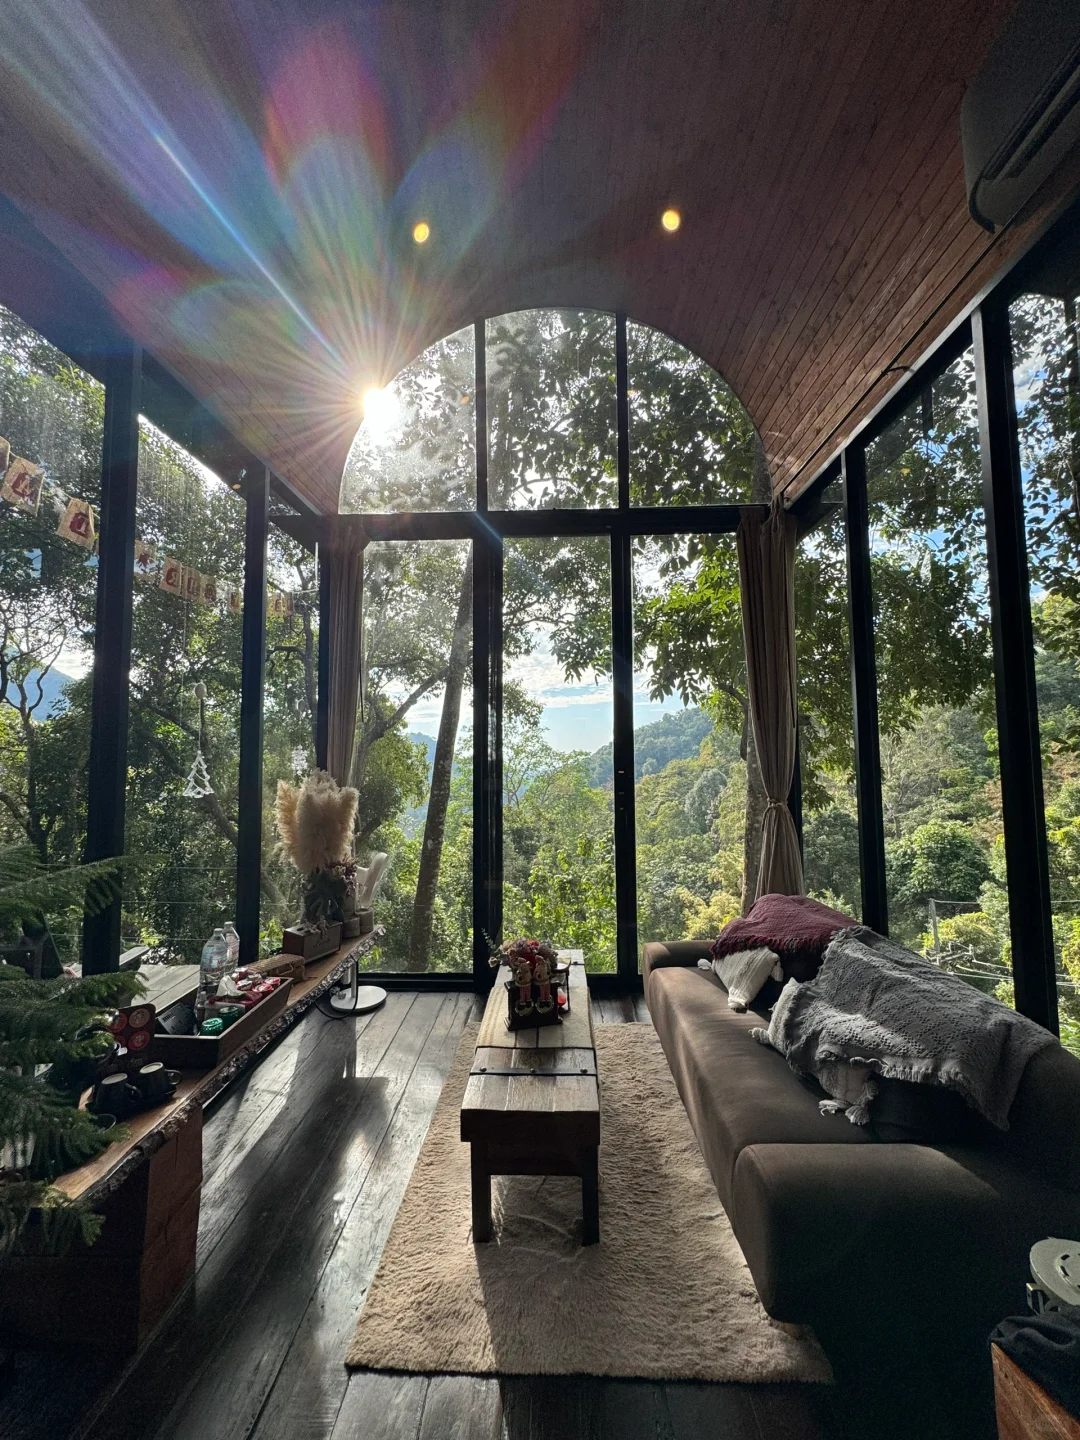 Chiang Mai-I stayed at Chiang Mai Glass Tree House Hotel for four nights without going out.